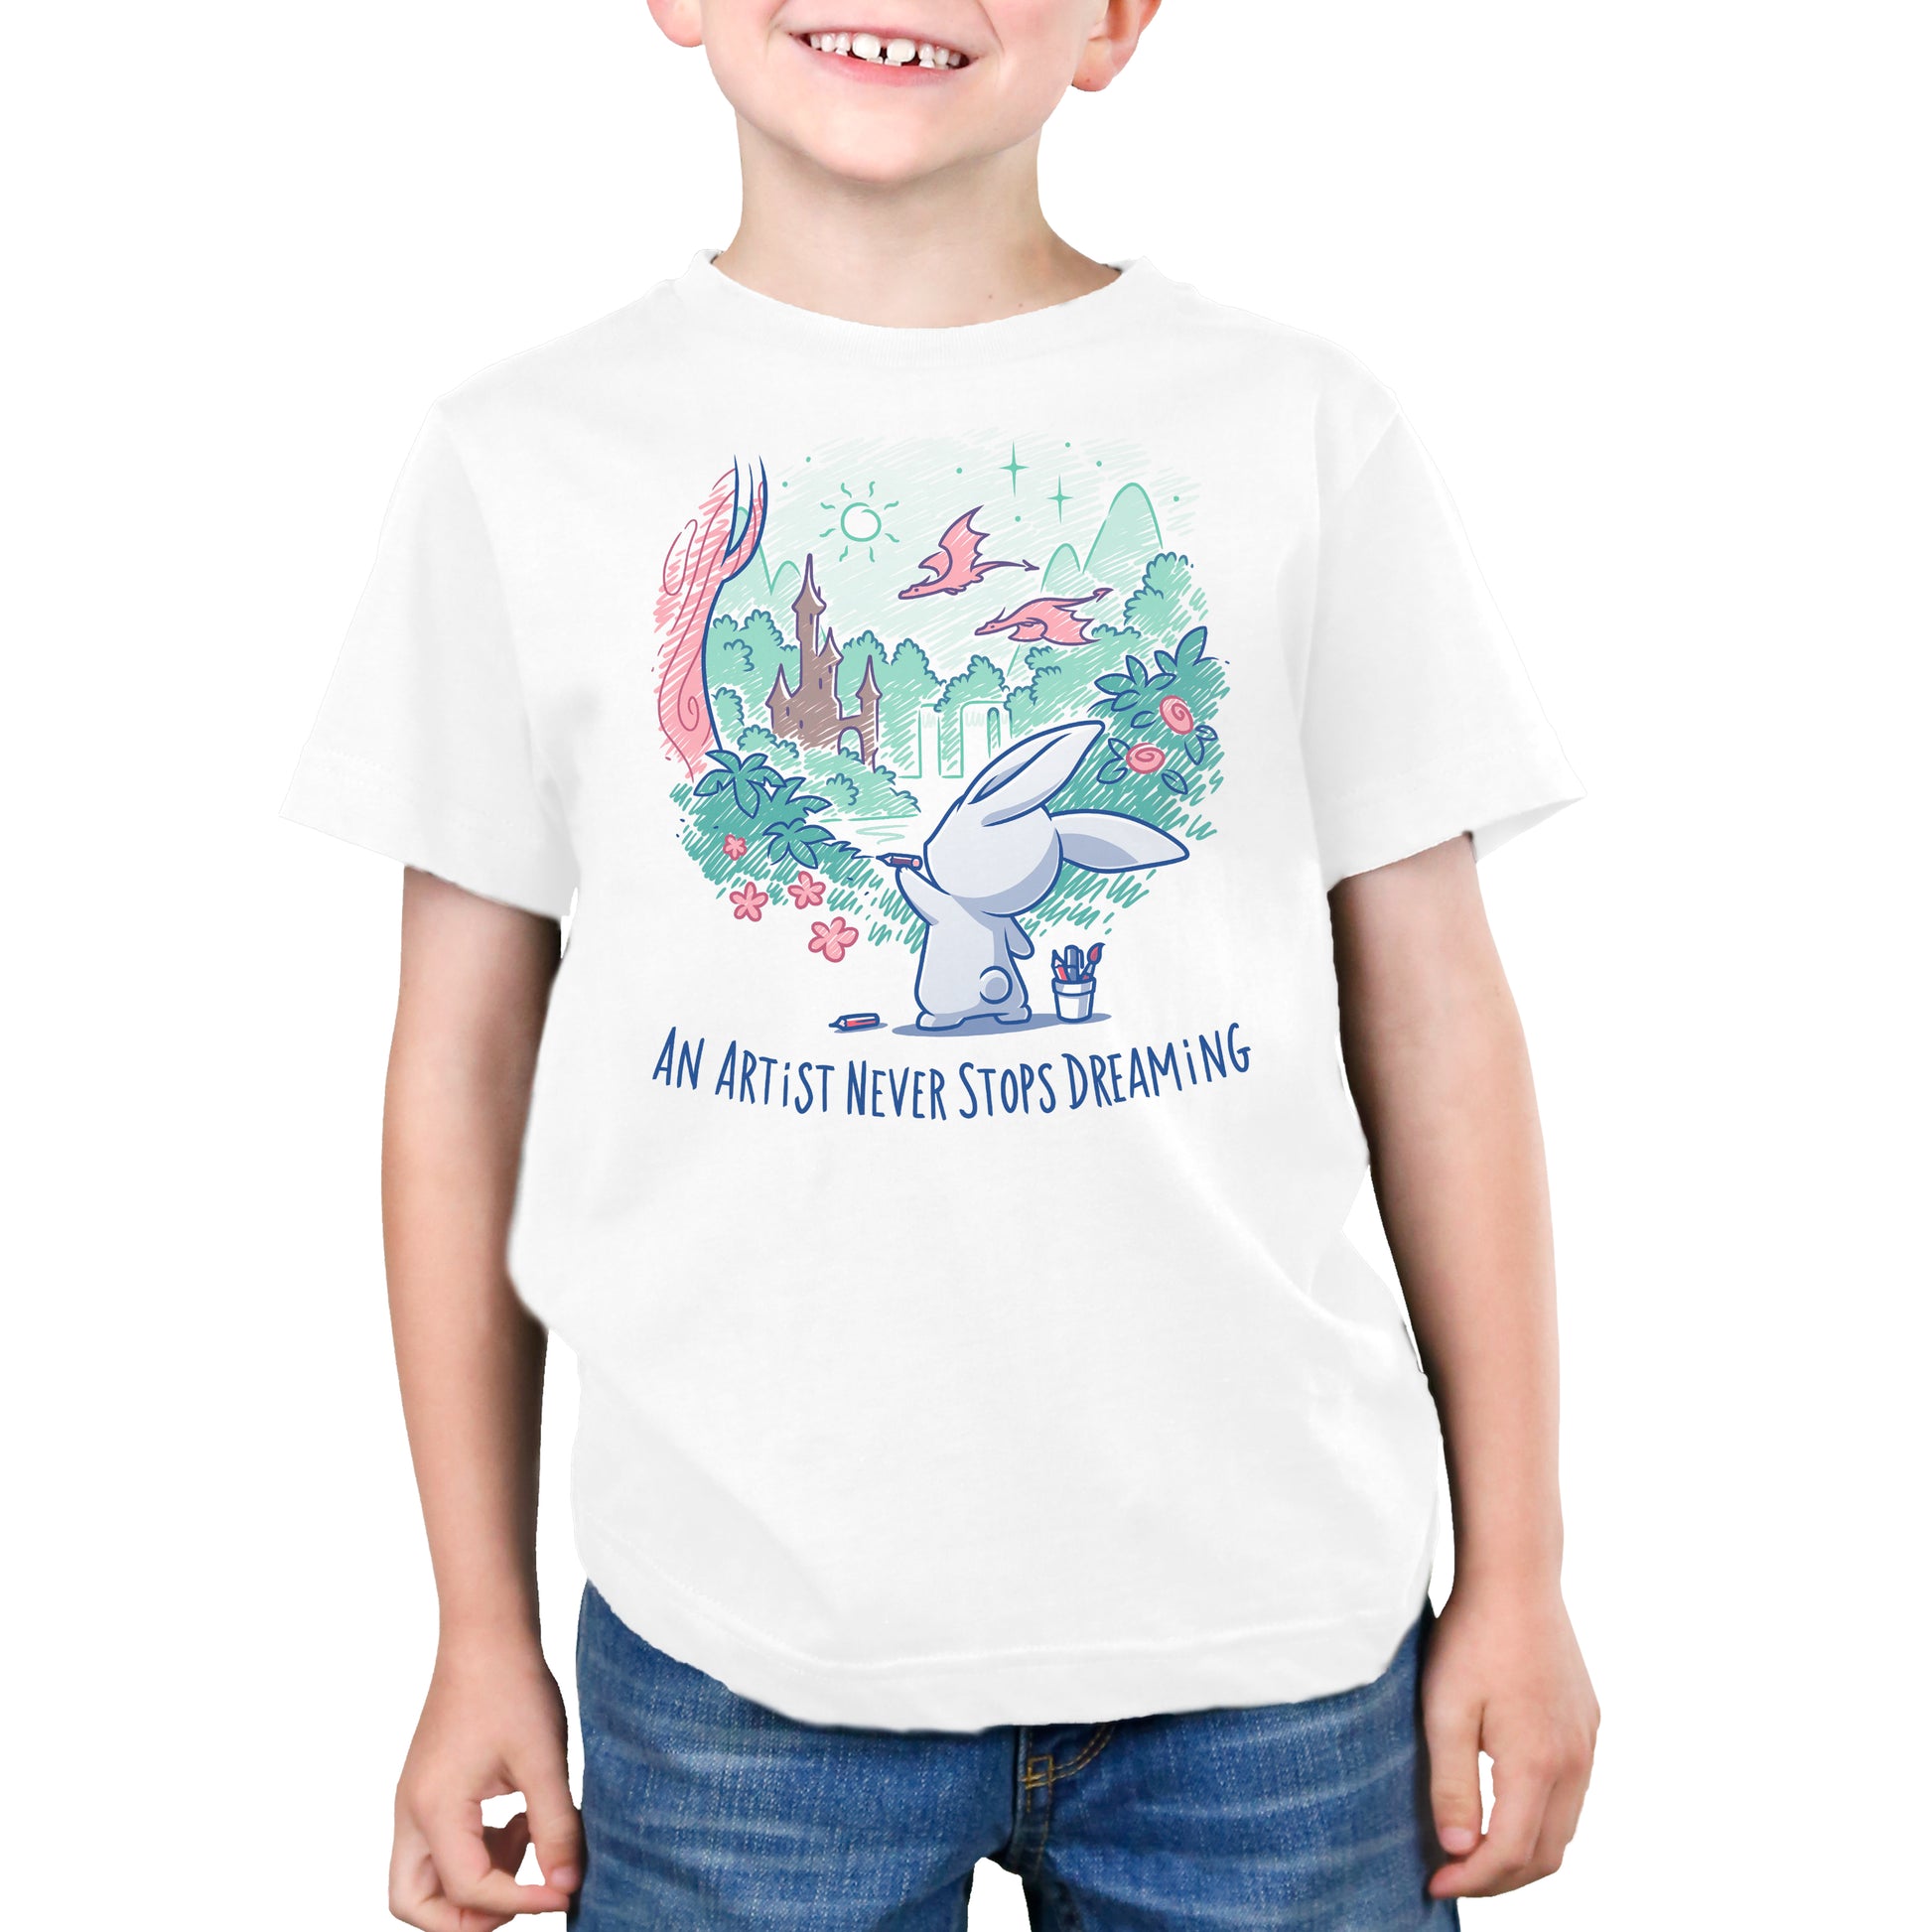 A young boy wearing a white t-shirt from TeeTurtle showcasing his creativity with the winter-themed design "An Artist Never Stops Dreaming".